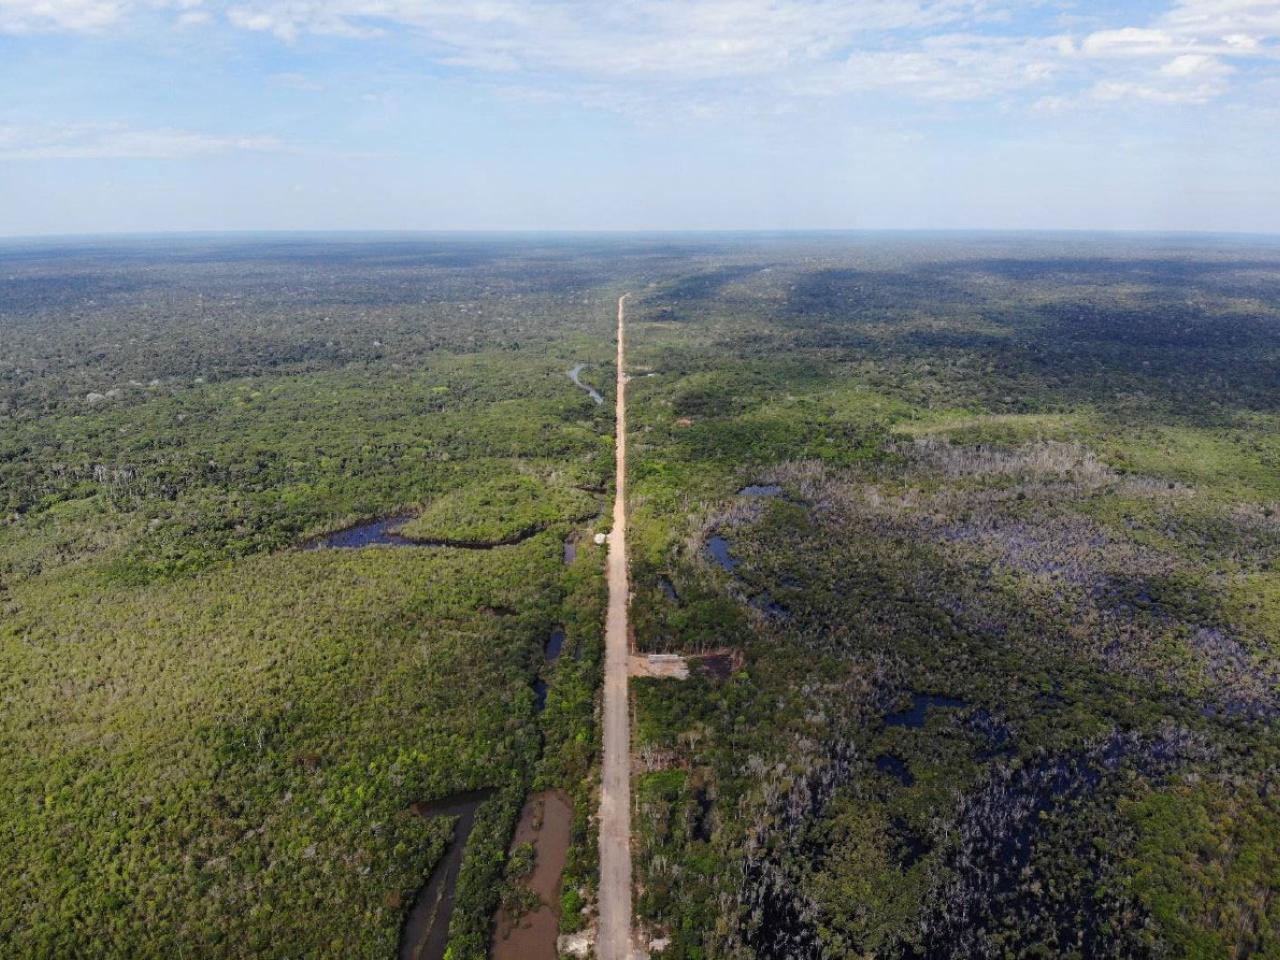 Ariel photo of road development in the Amazon State of Brazil